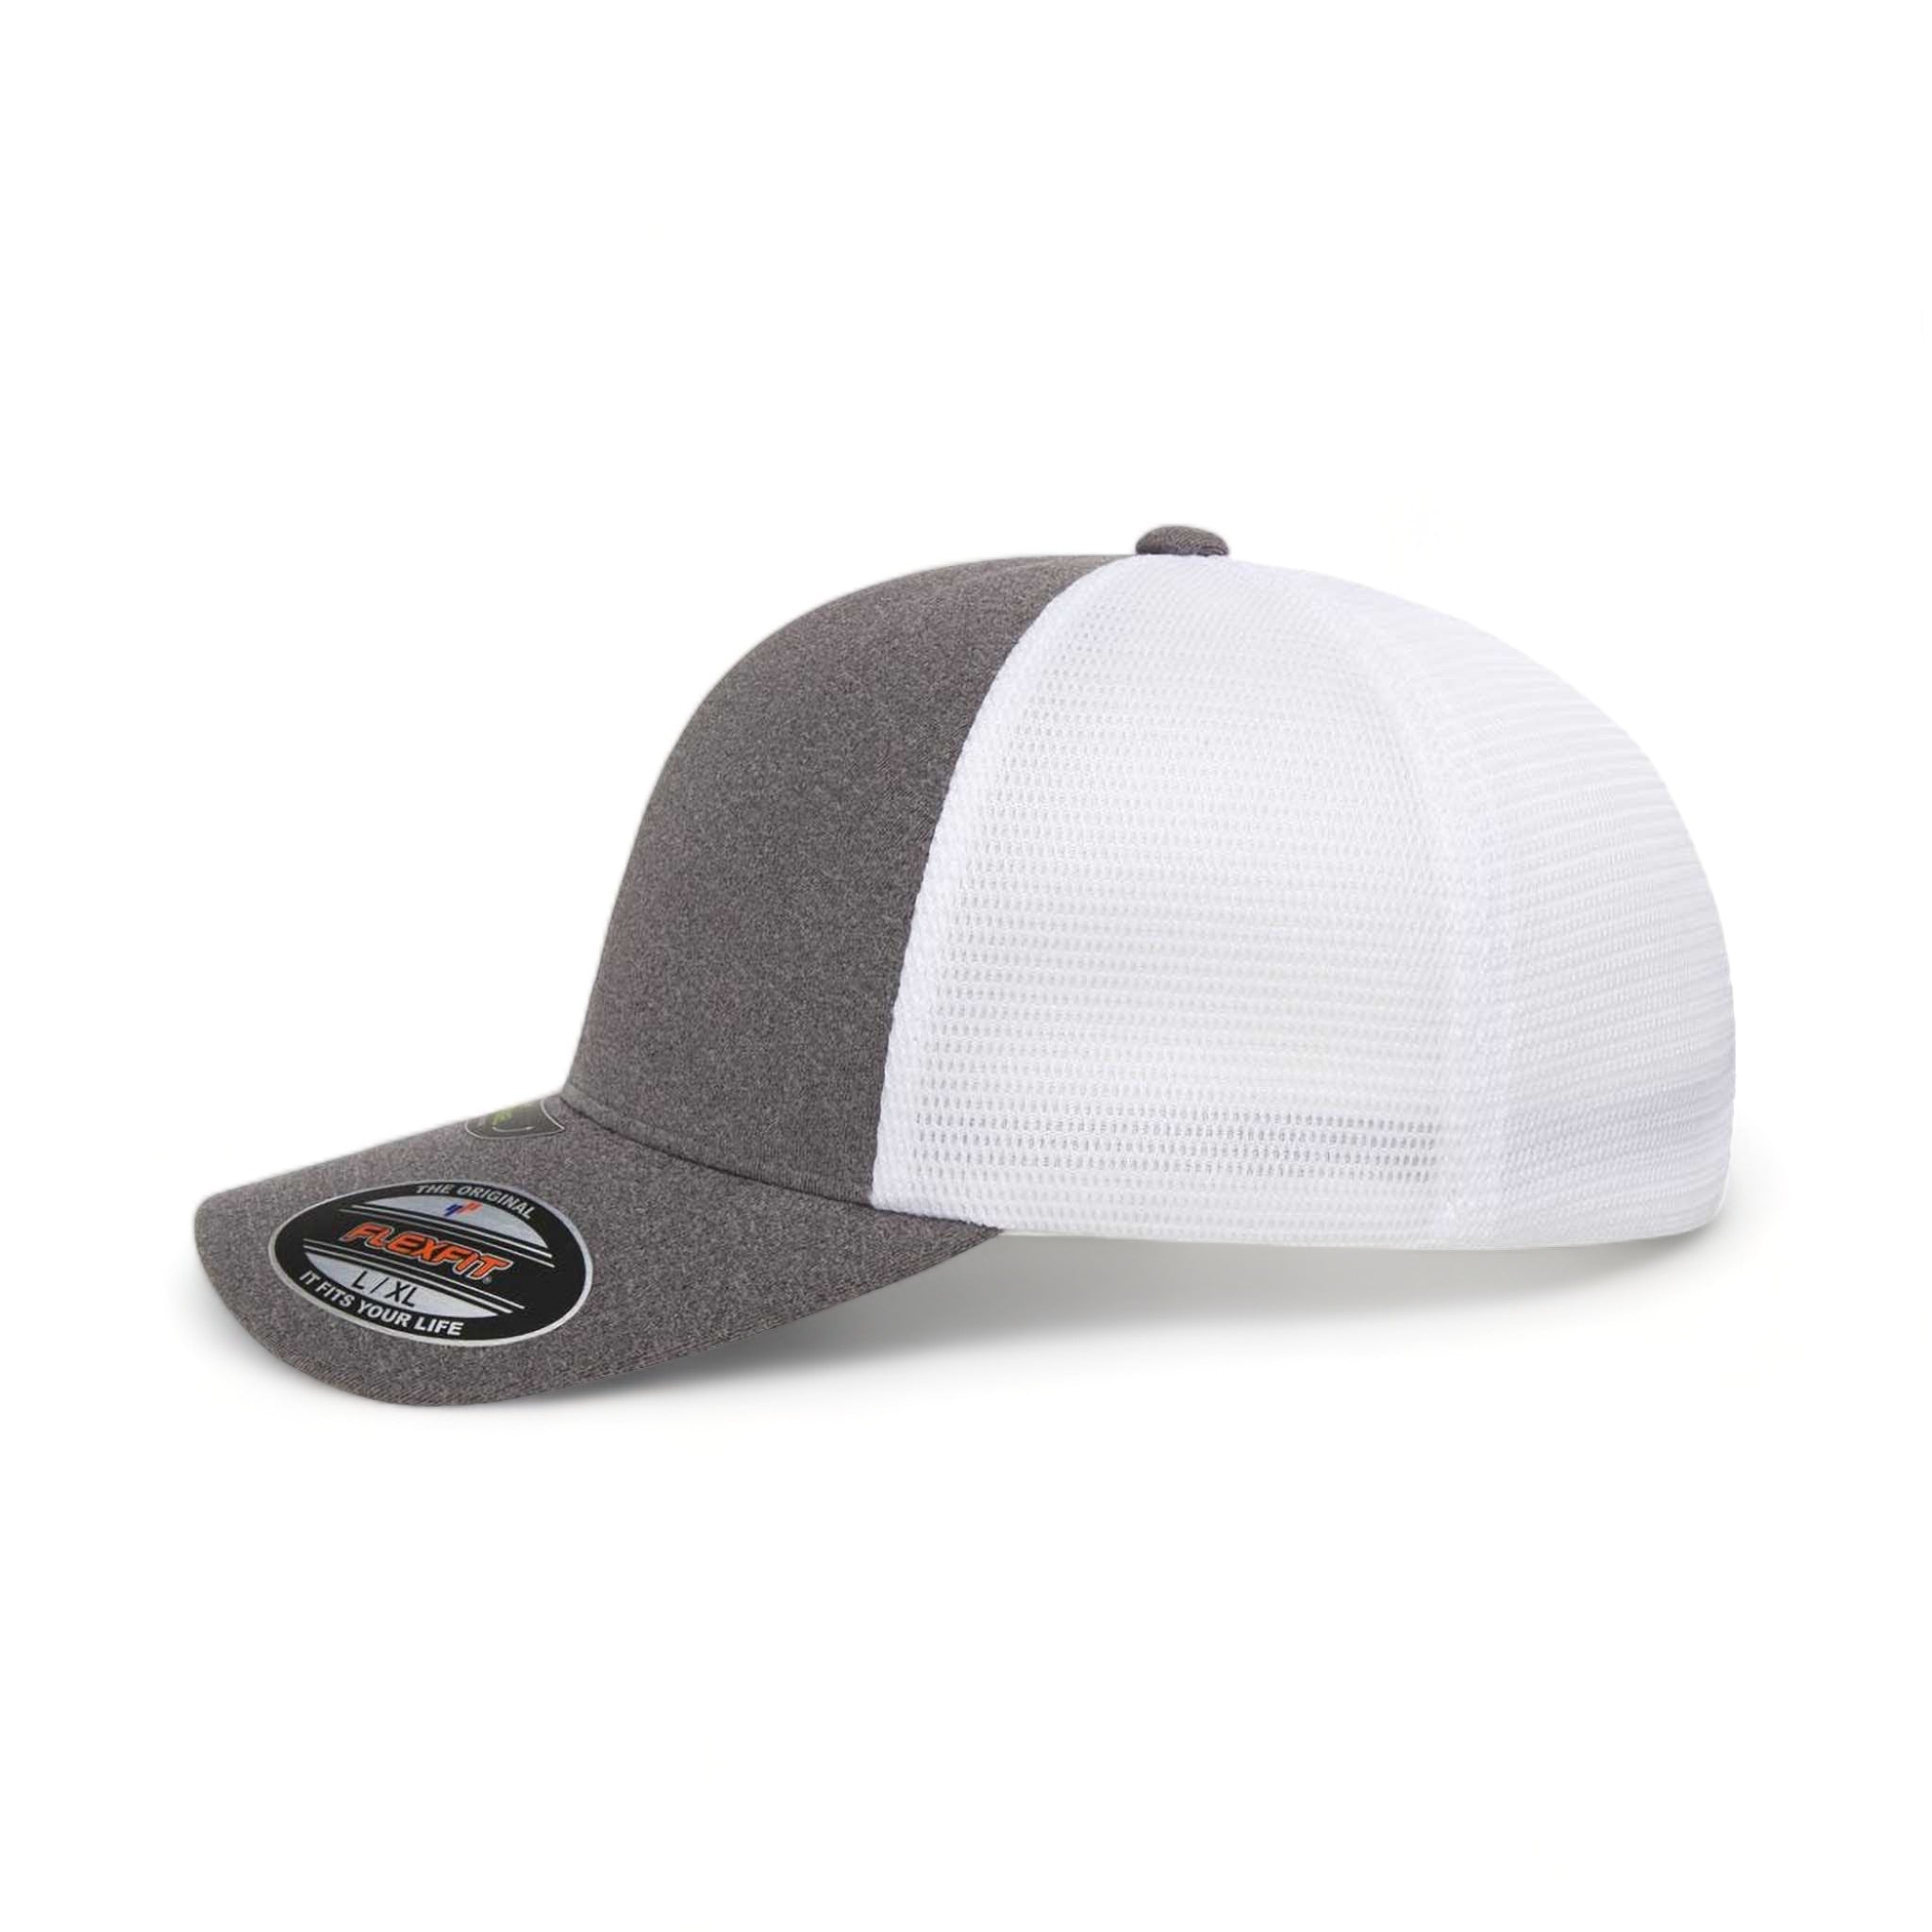 Side view of Flexfit 5511UP custom hat in mélange heather and white